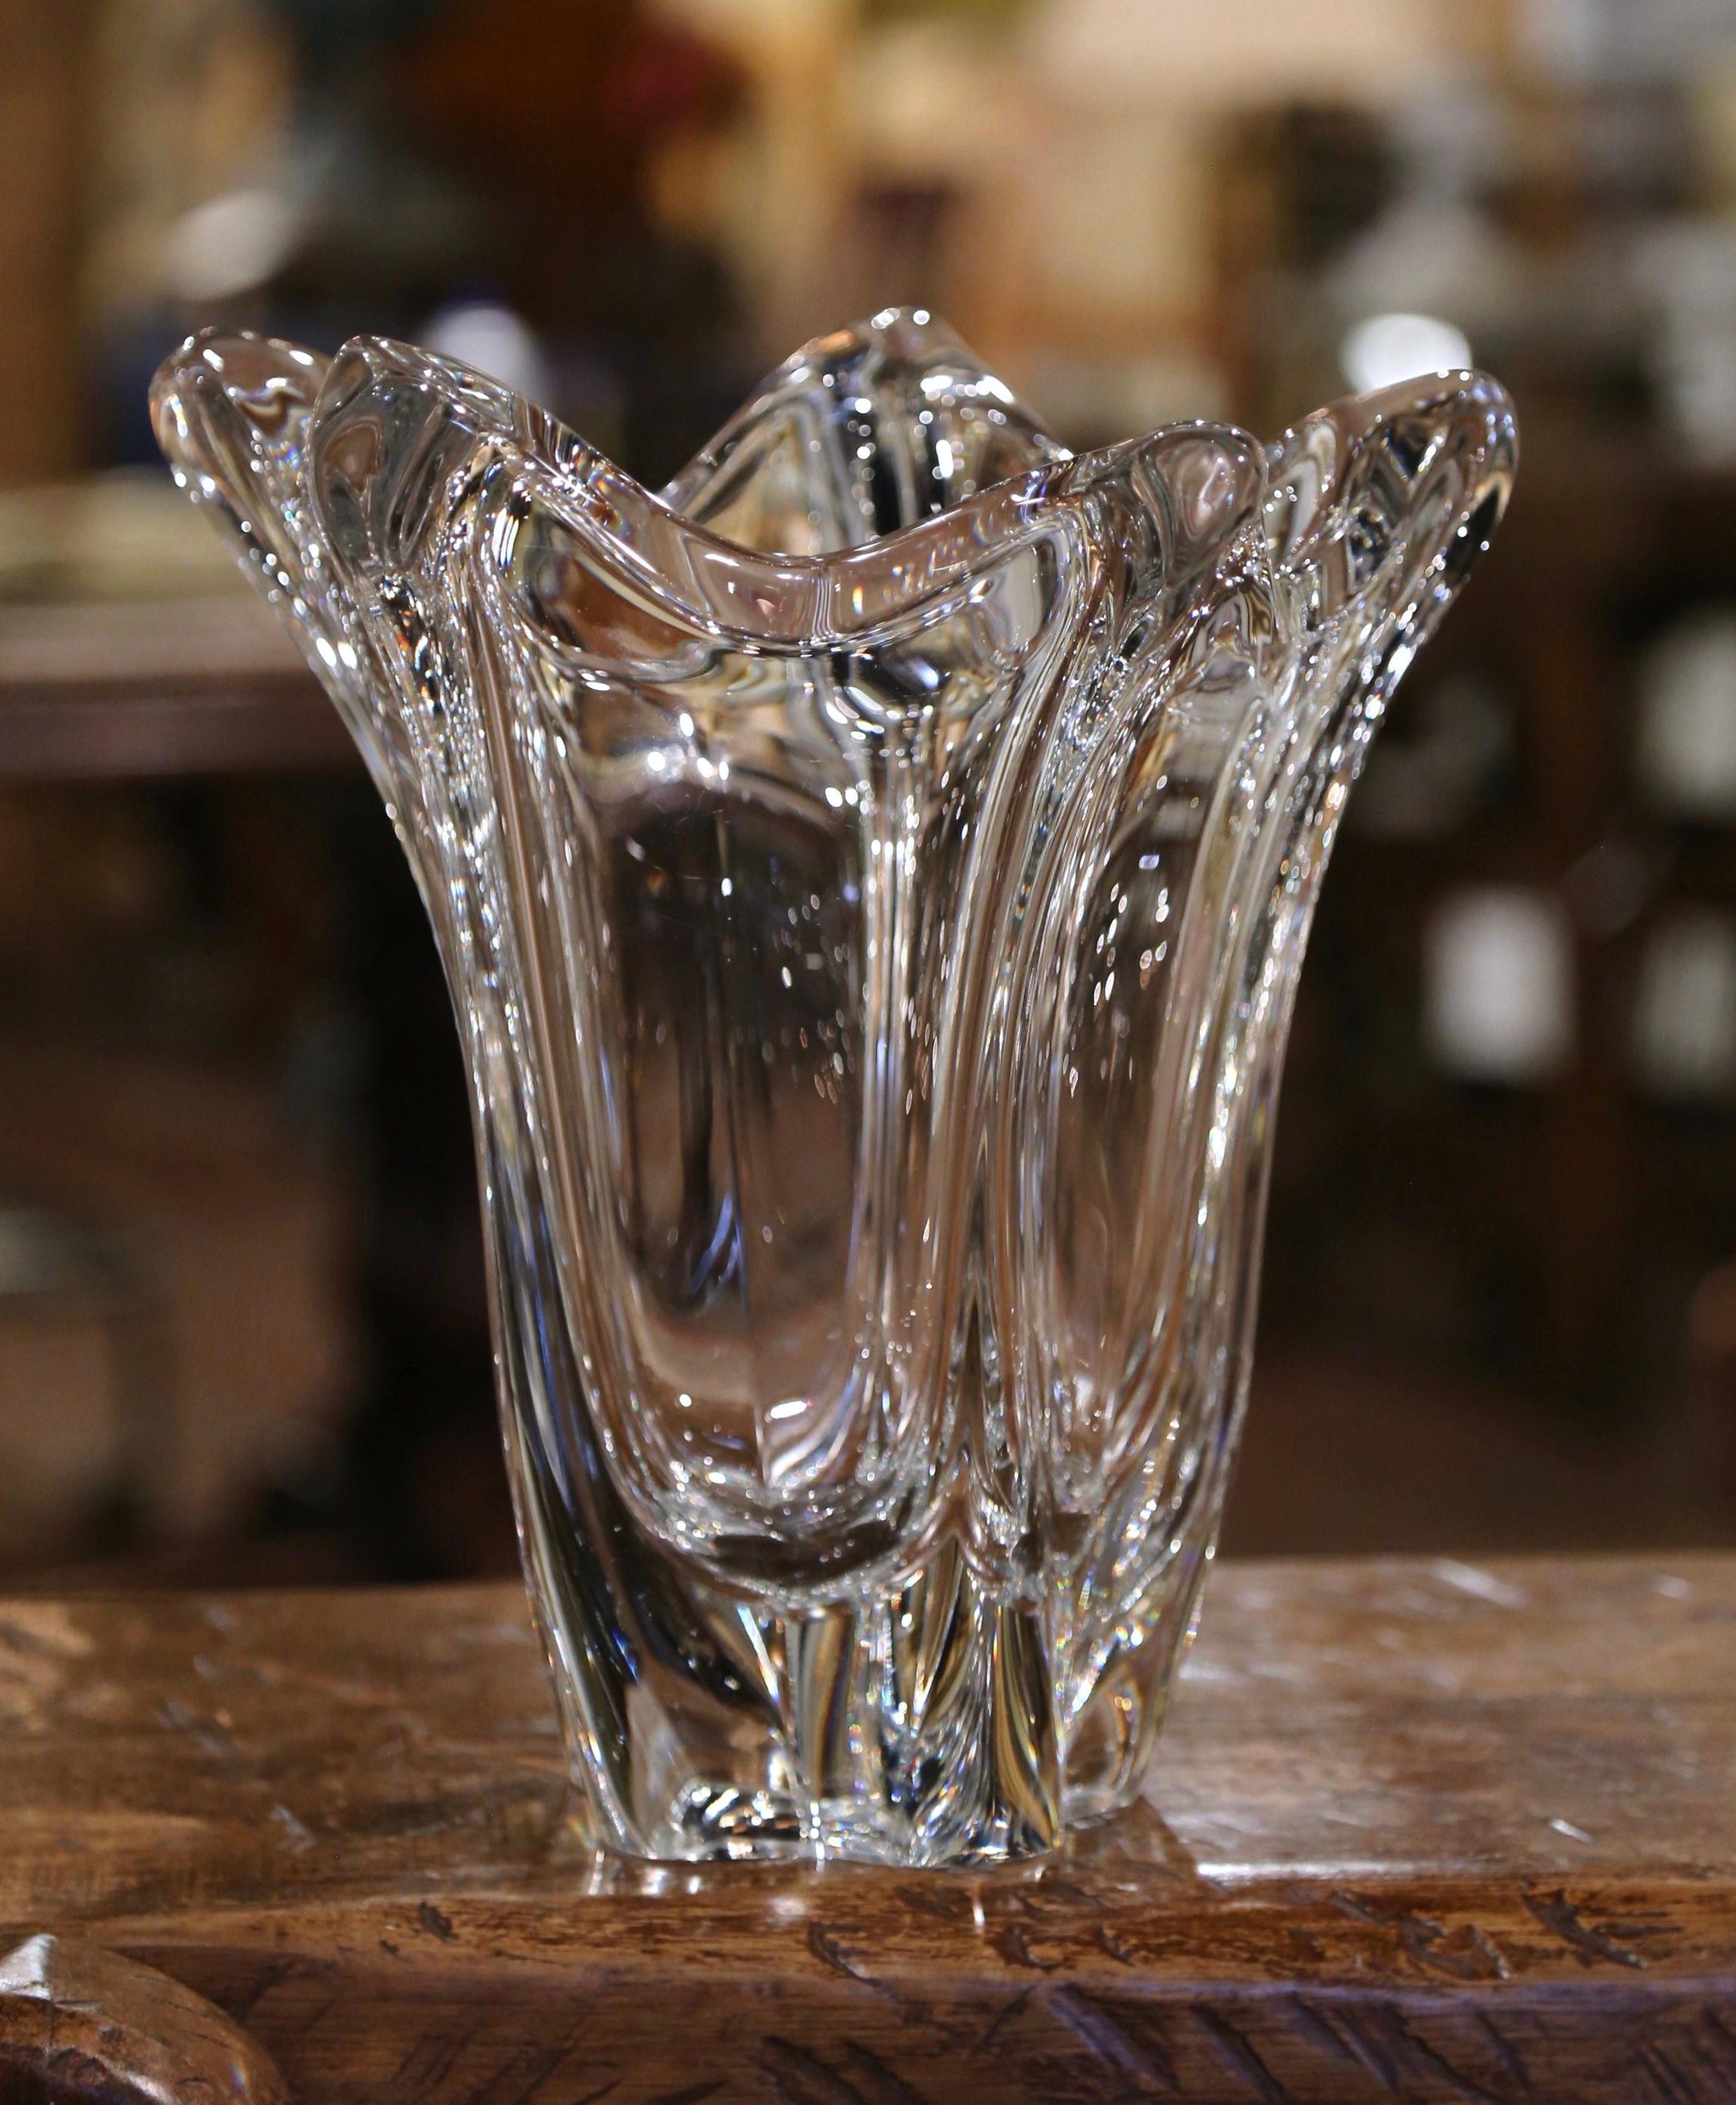 This elegant, hand blown crystal art vase was crafted in France, circa 1950. The large antique piece features a pulled feathered technique with an intricate elongated design and scalloped rim. The large decorative flower recipient is in excellent